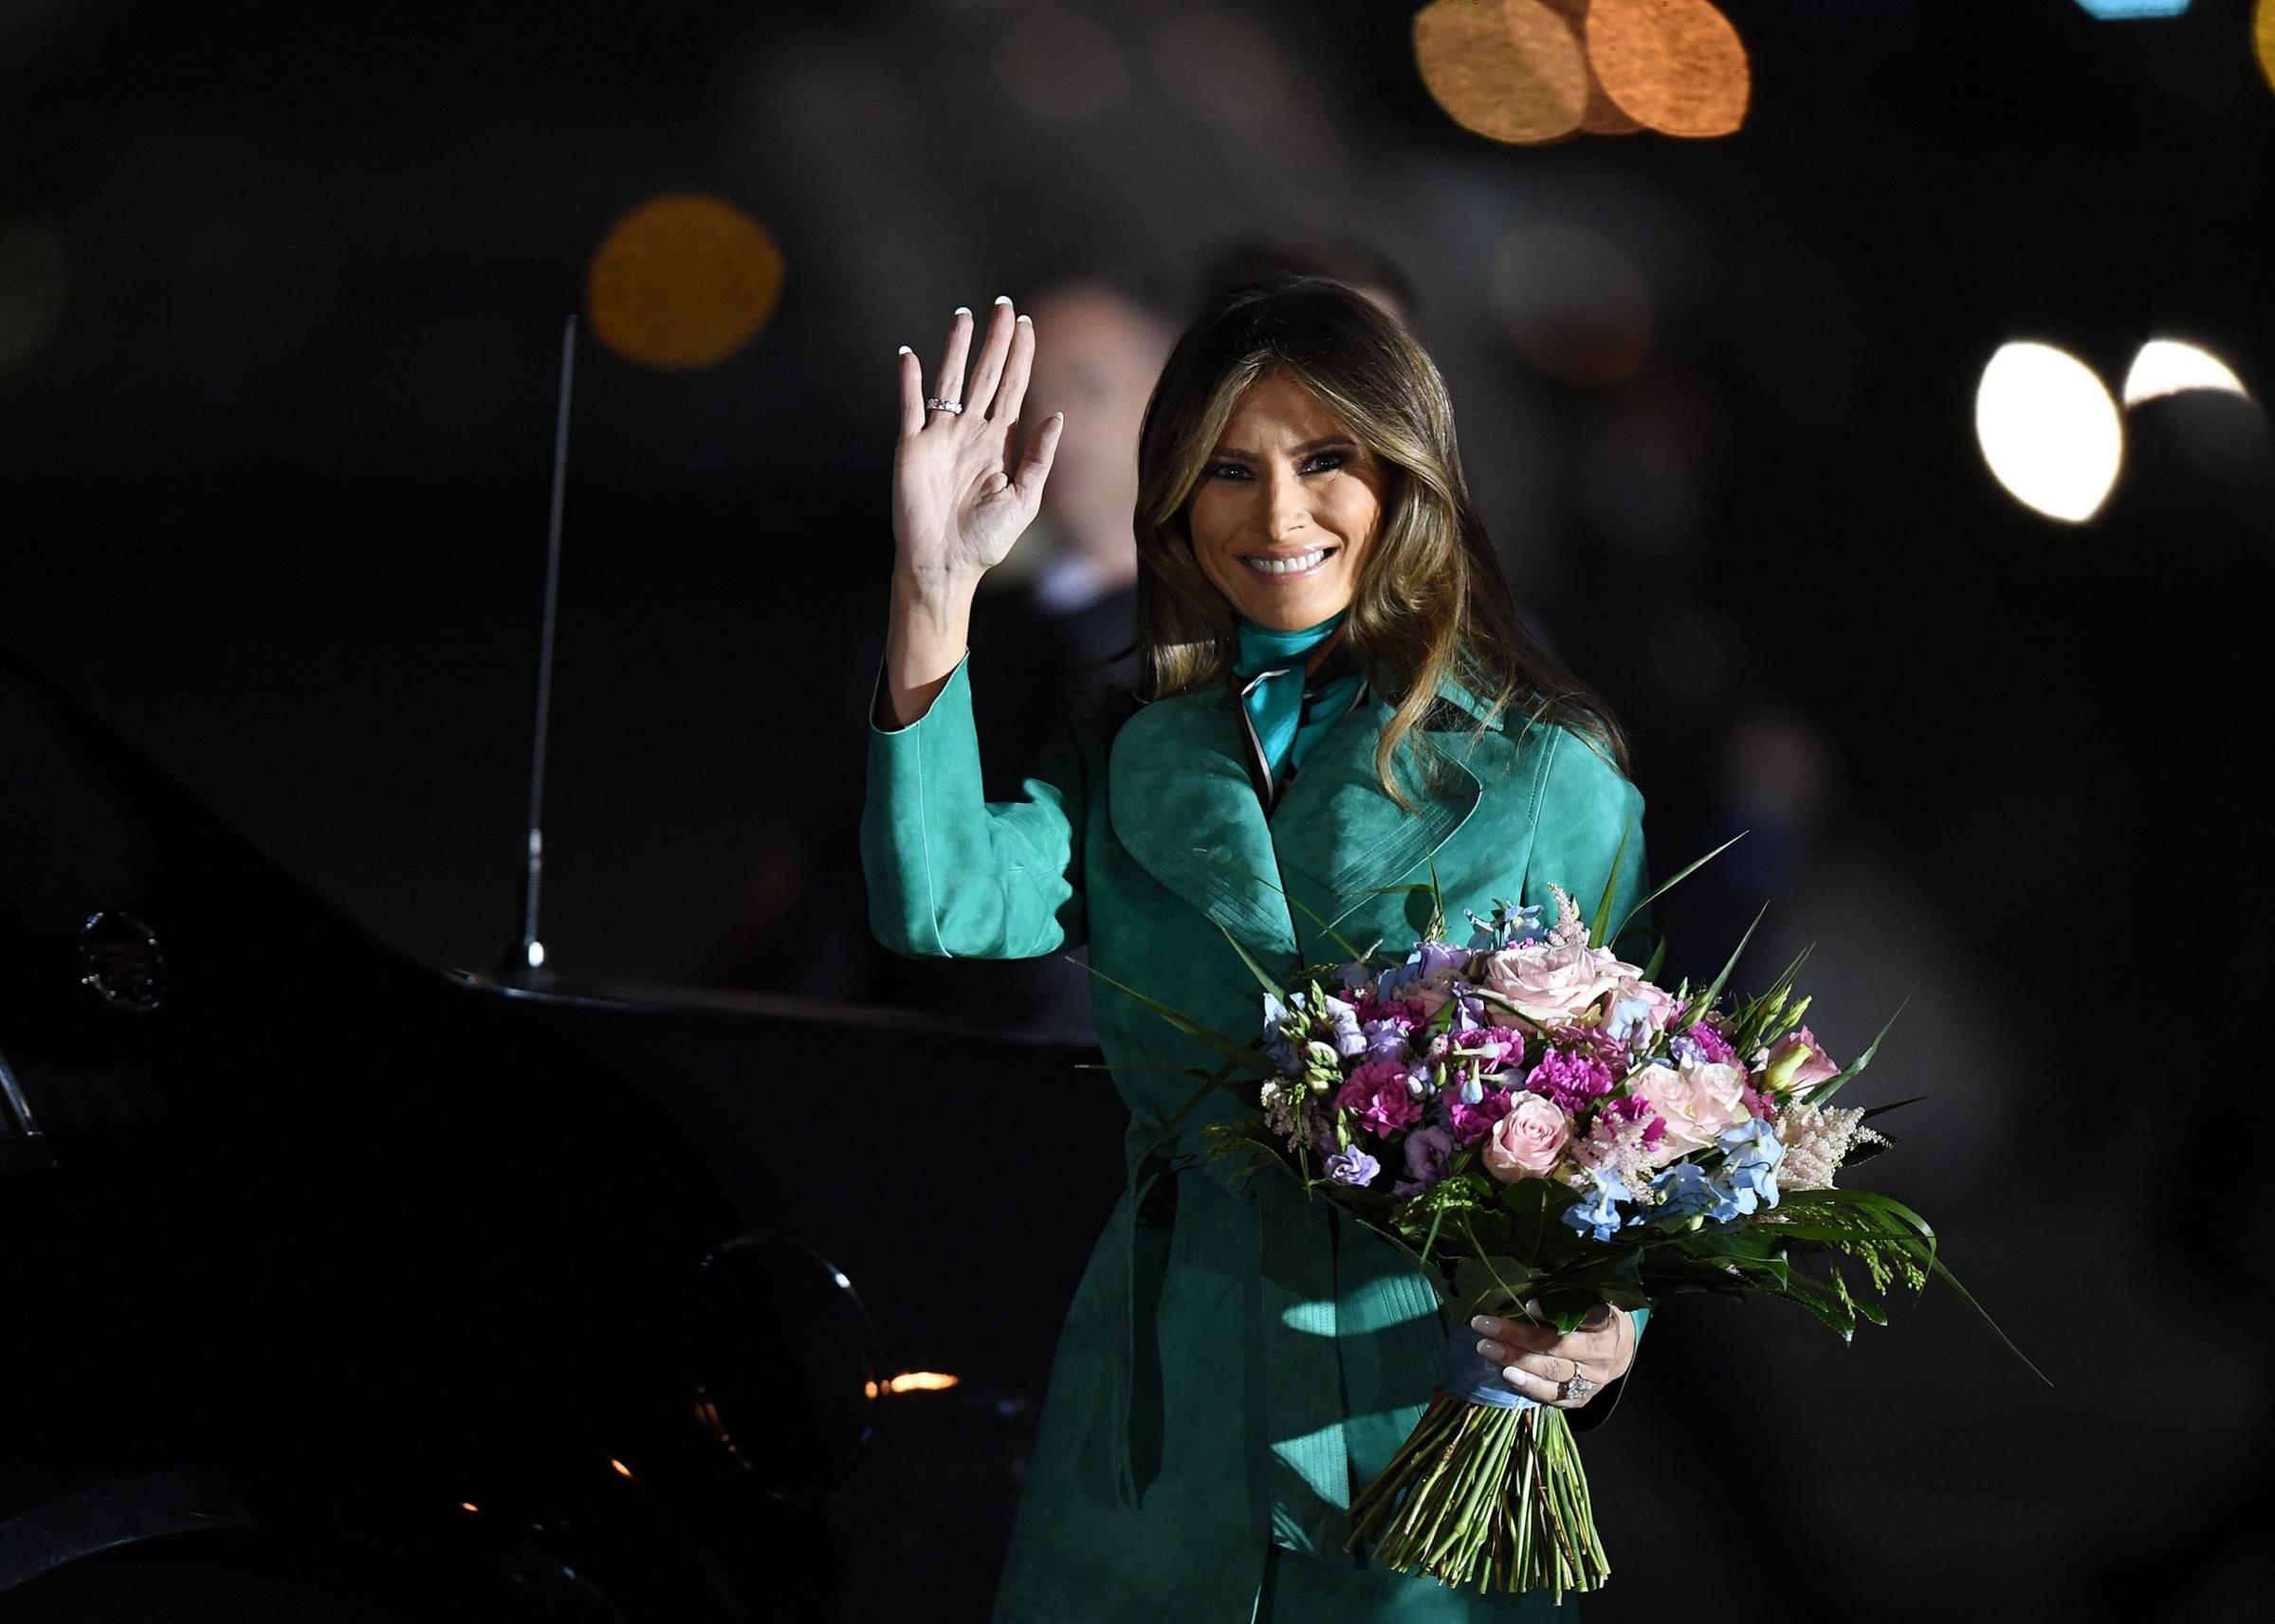 Arrival of President Trump and first lady Melania Trump, wearing green suede Diane von Furstenberg coat on July 05, 2017 in Warsaw, Poland.